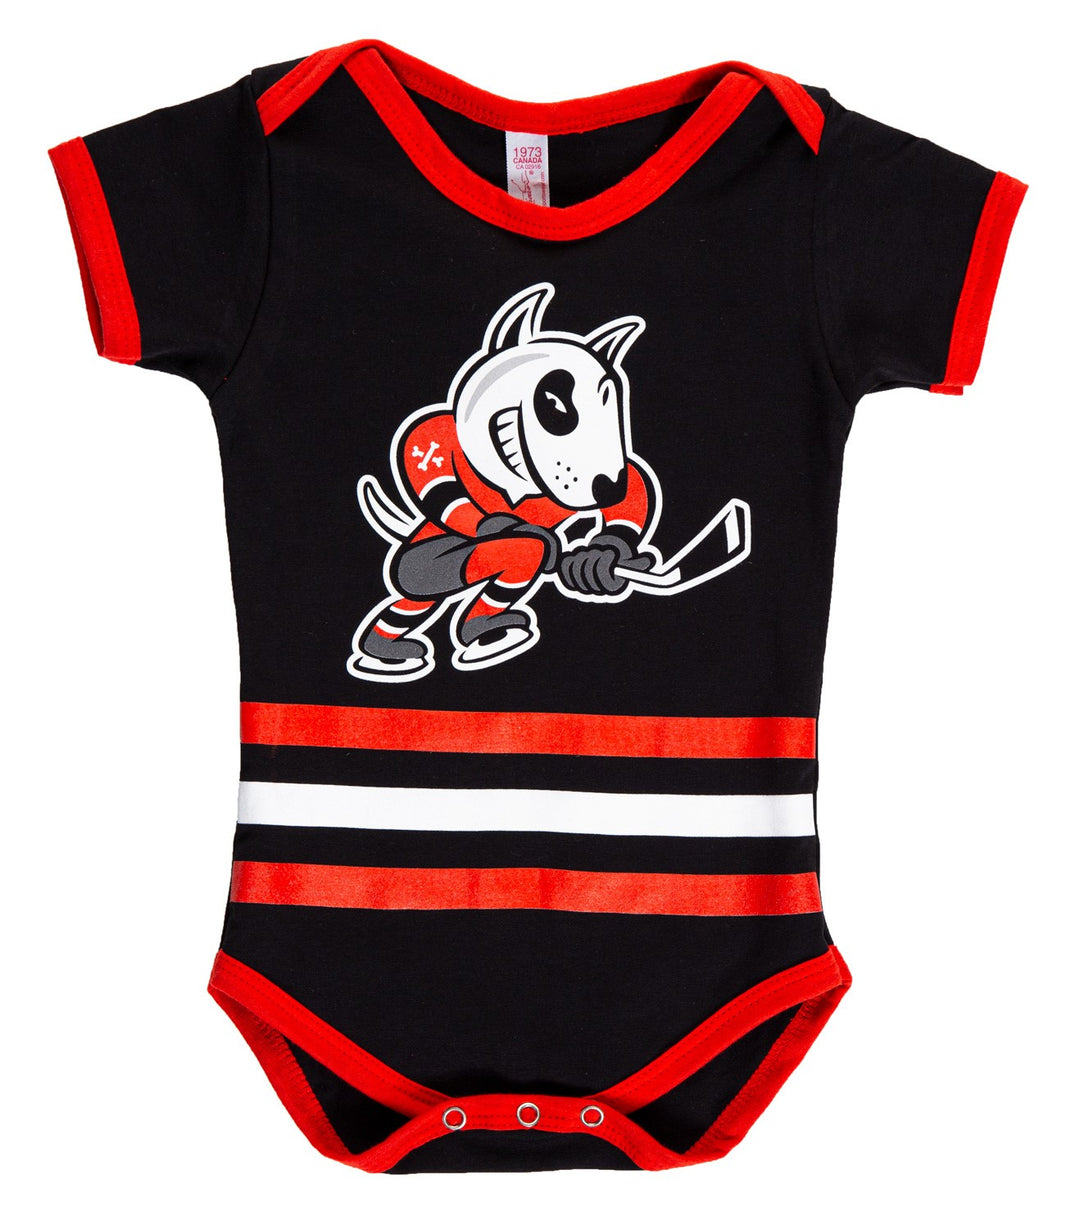 Niagara IceDogs Baby Onesie Front View. Black Onesie With Red Trim and Bones Logo On Middle Of Chest.